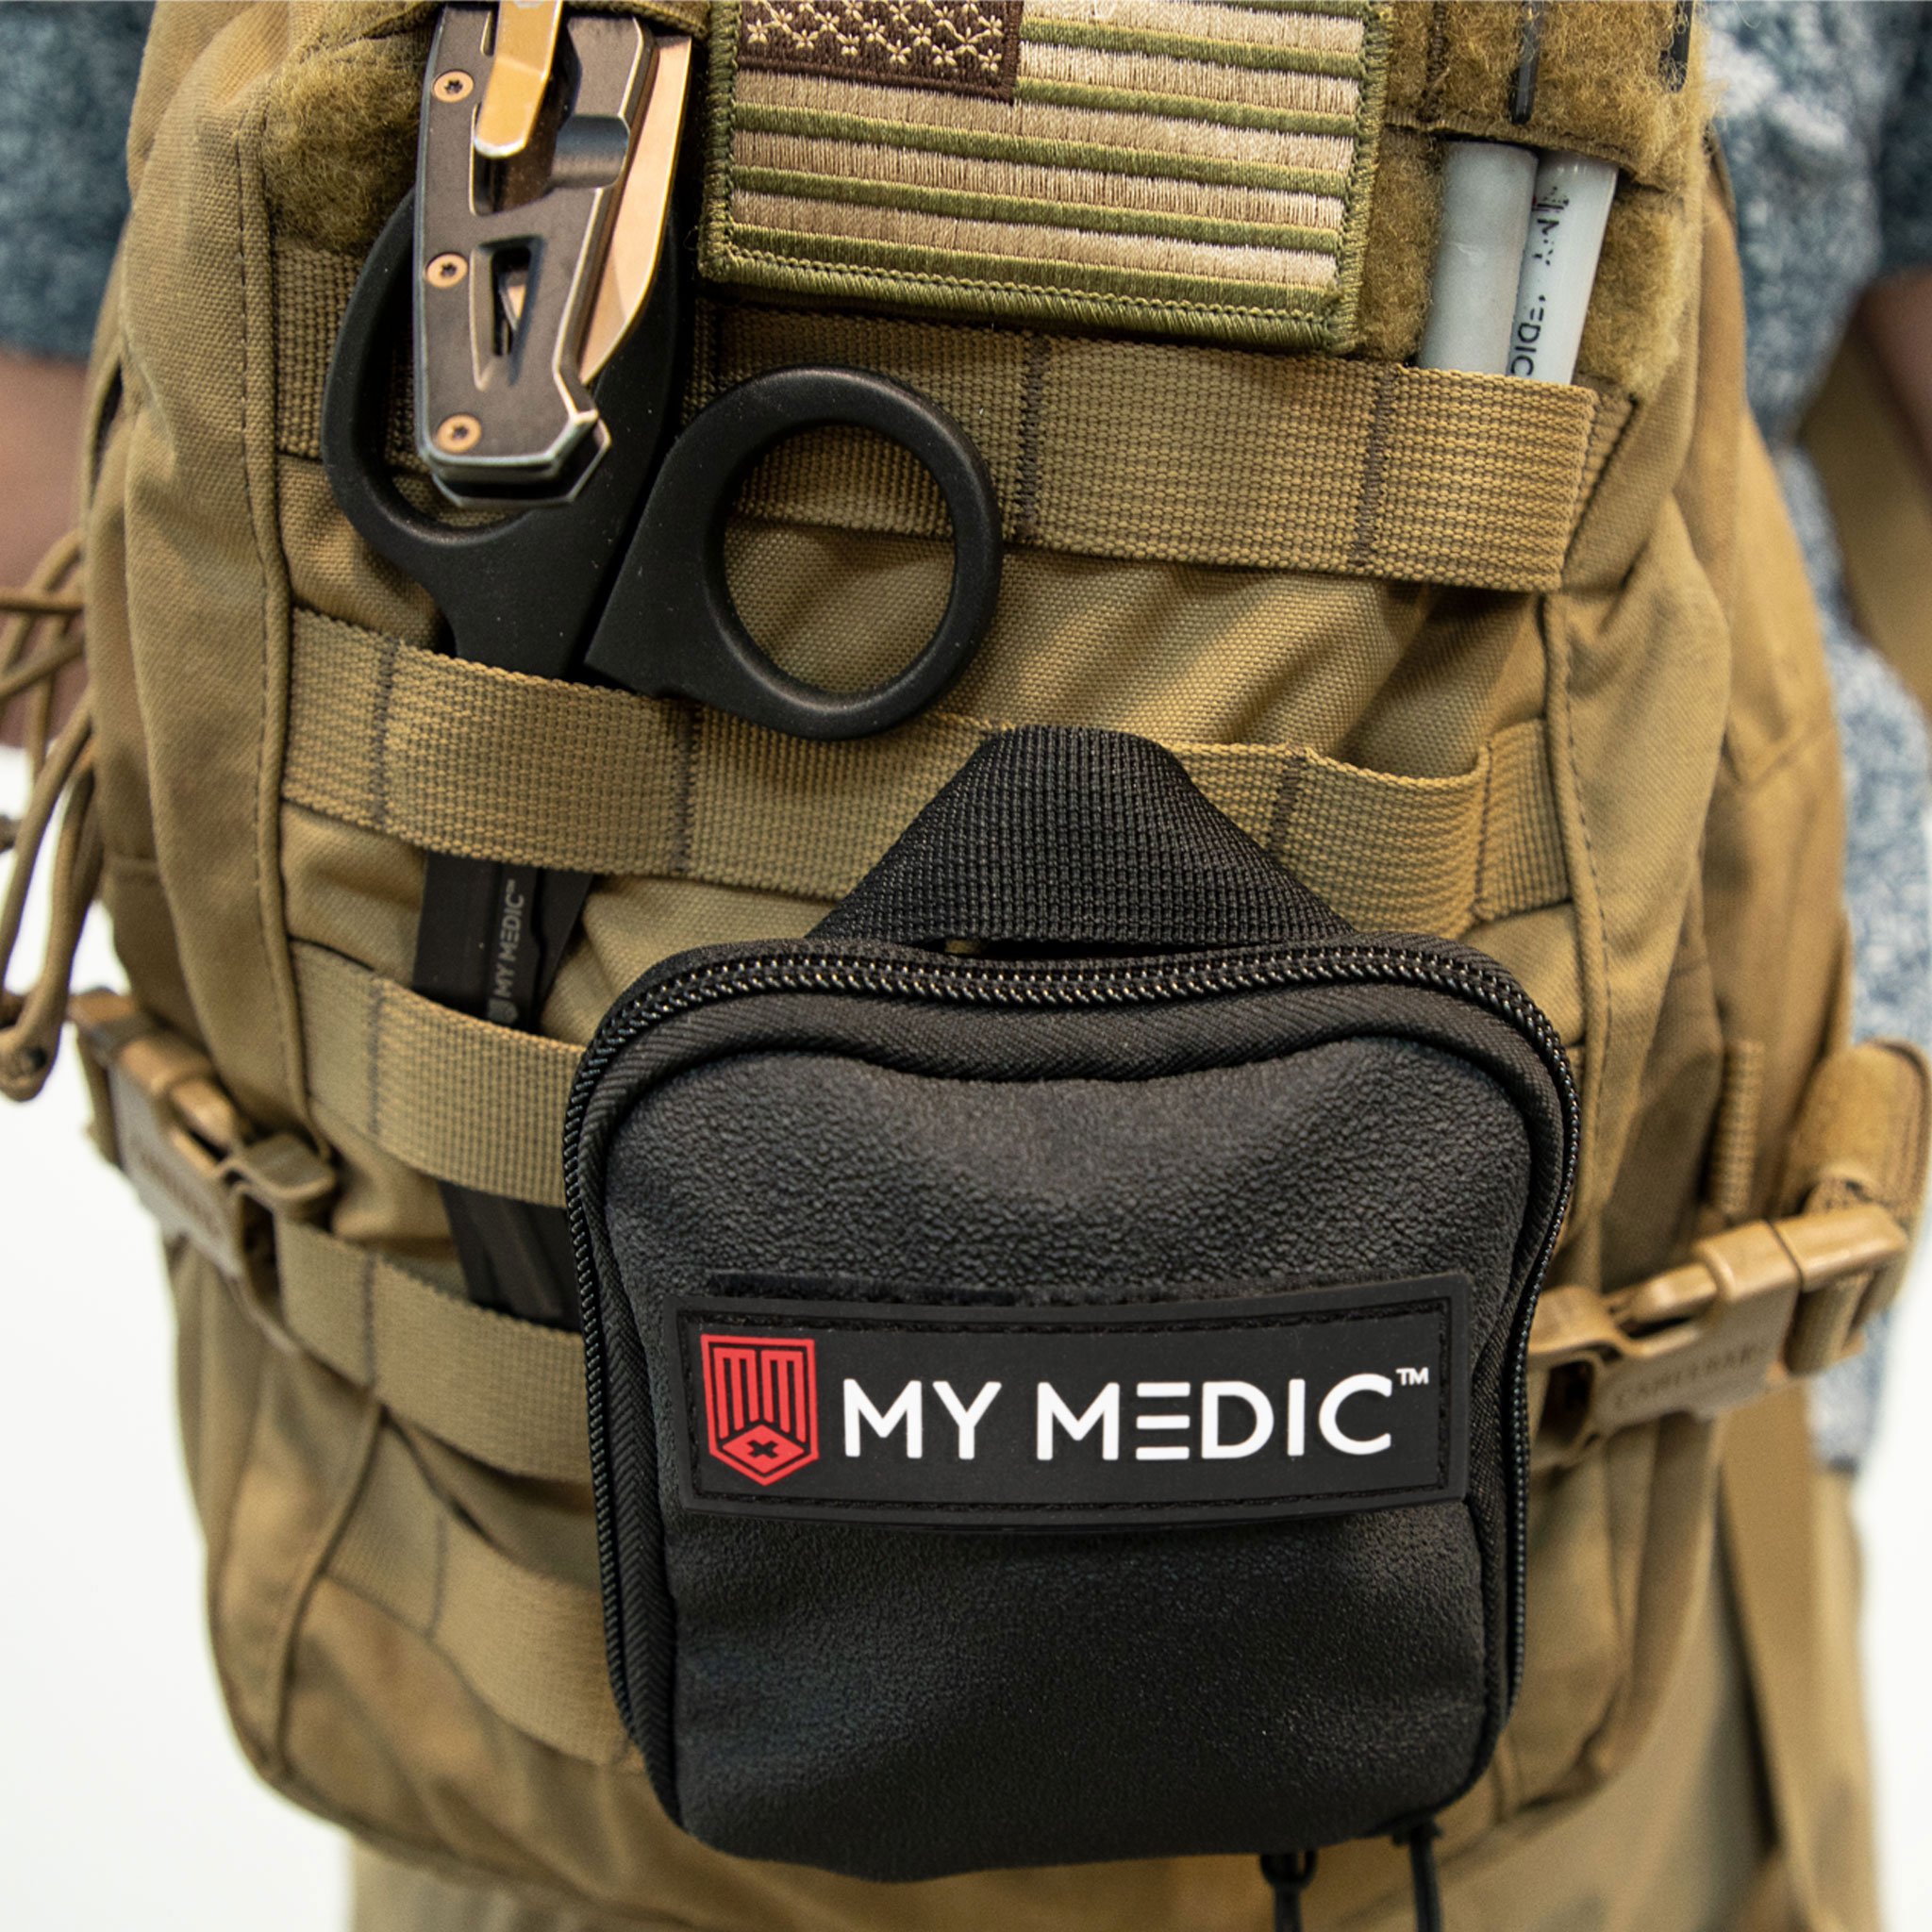 Every Day Carry First Aid Kit